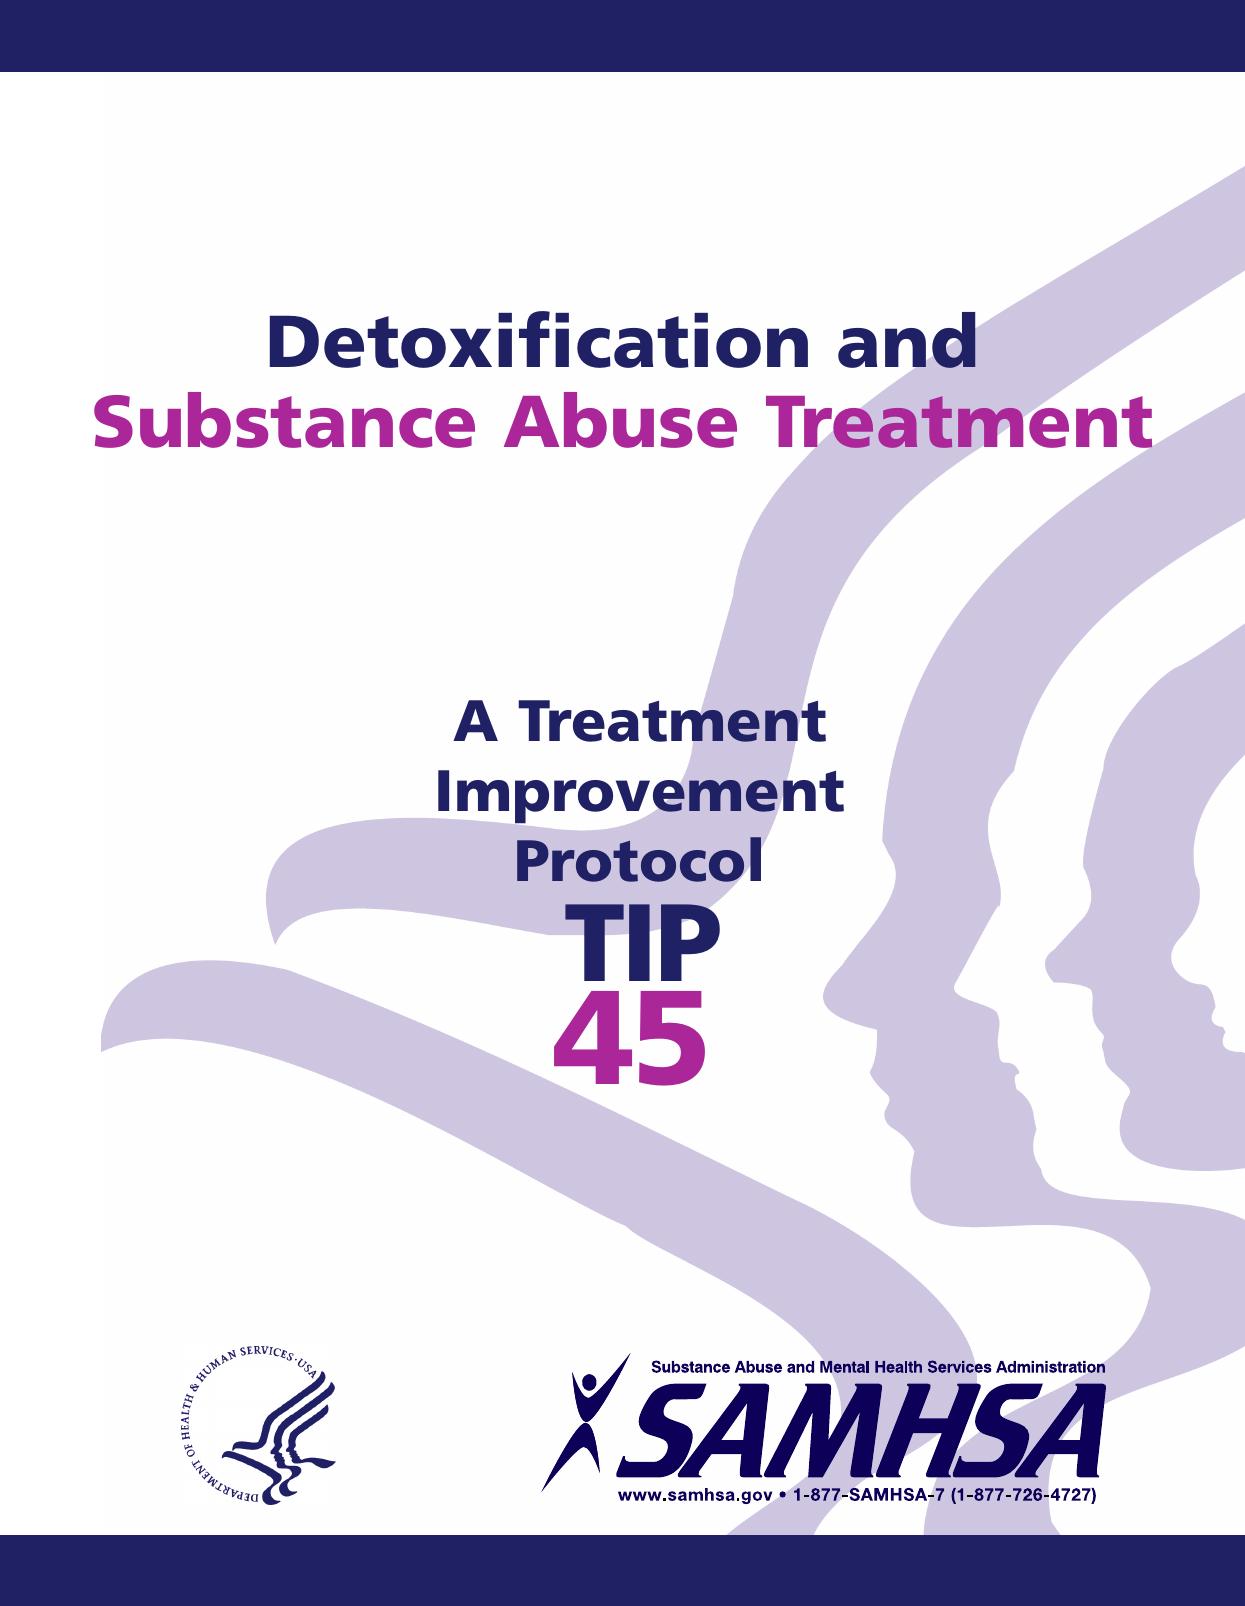 TIP 45 Detoxification and Substance Abuse Treatment